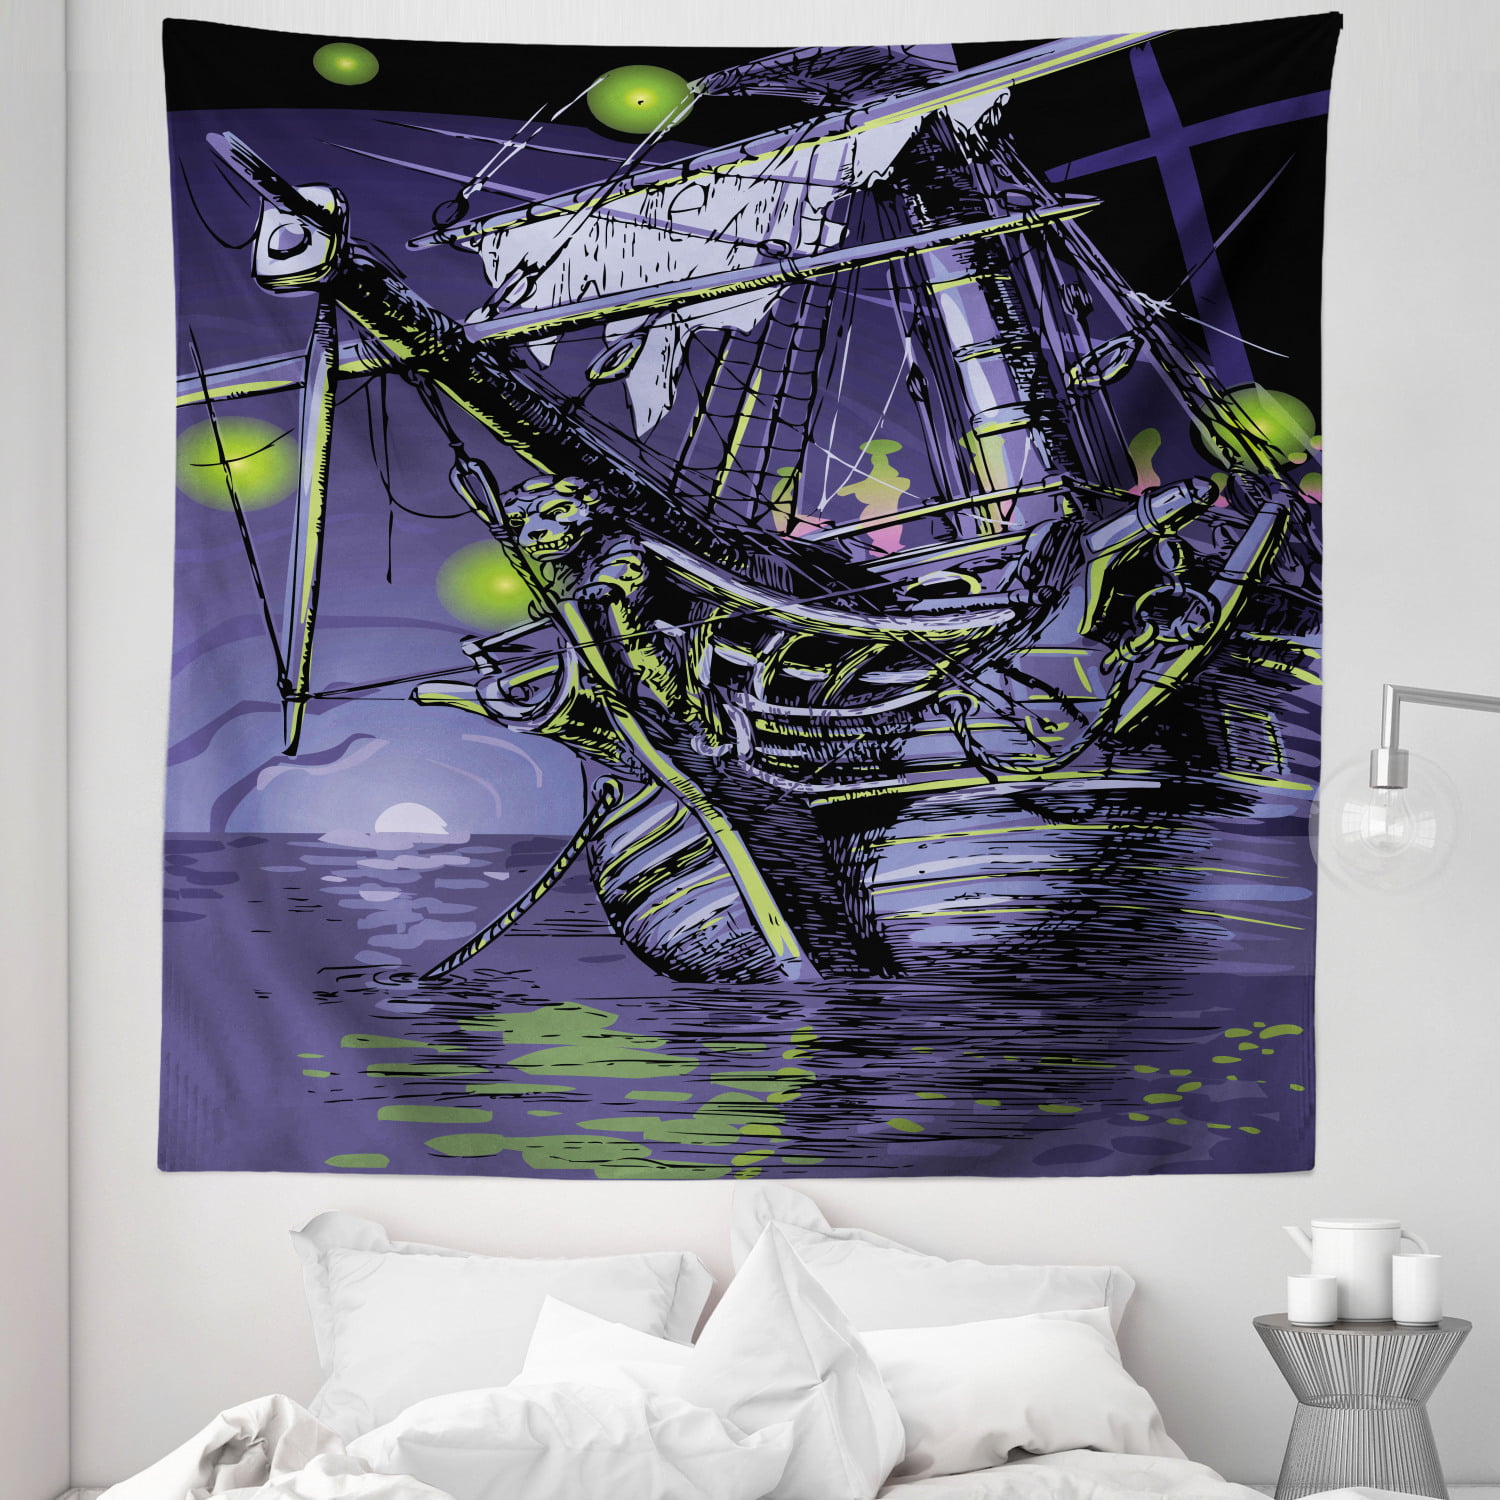 Pirate Sailboat Island Forest Sea Hippie Tapestry Wall Hanging Blanket Wall Art 